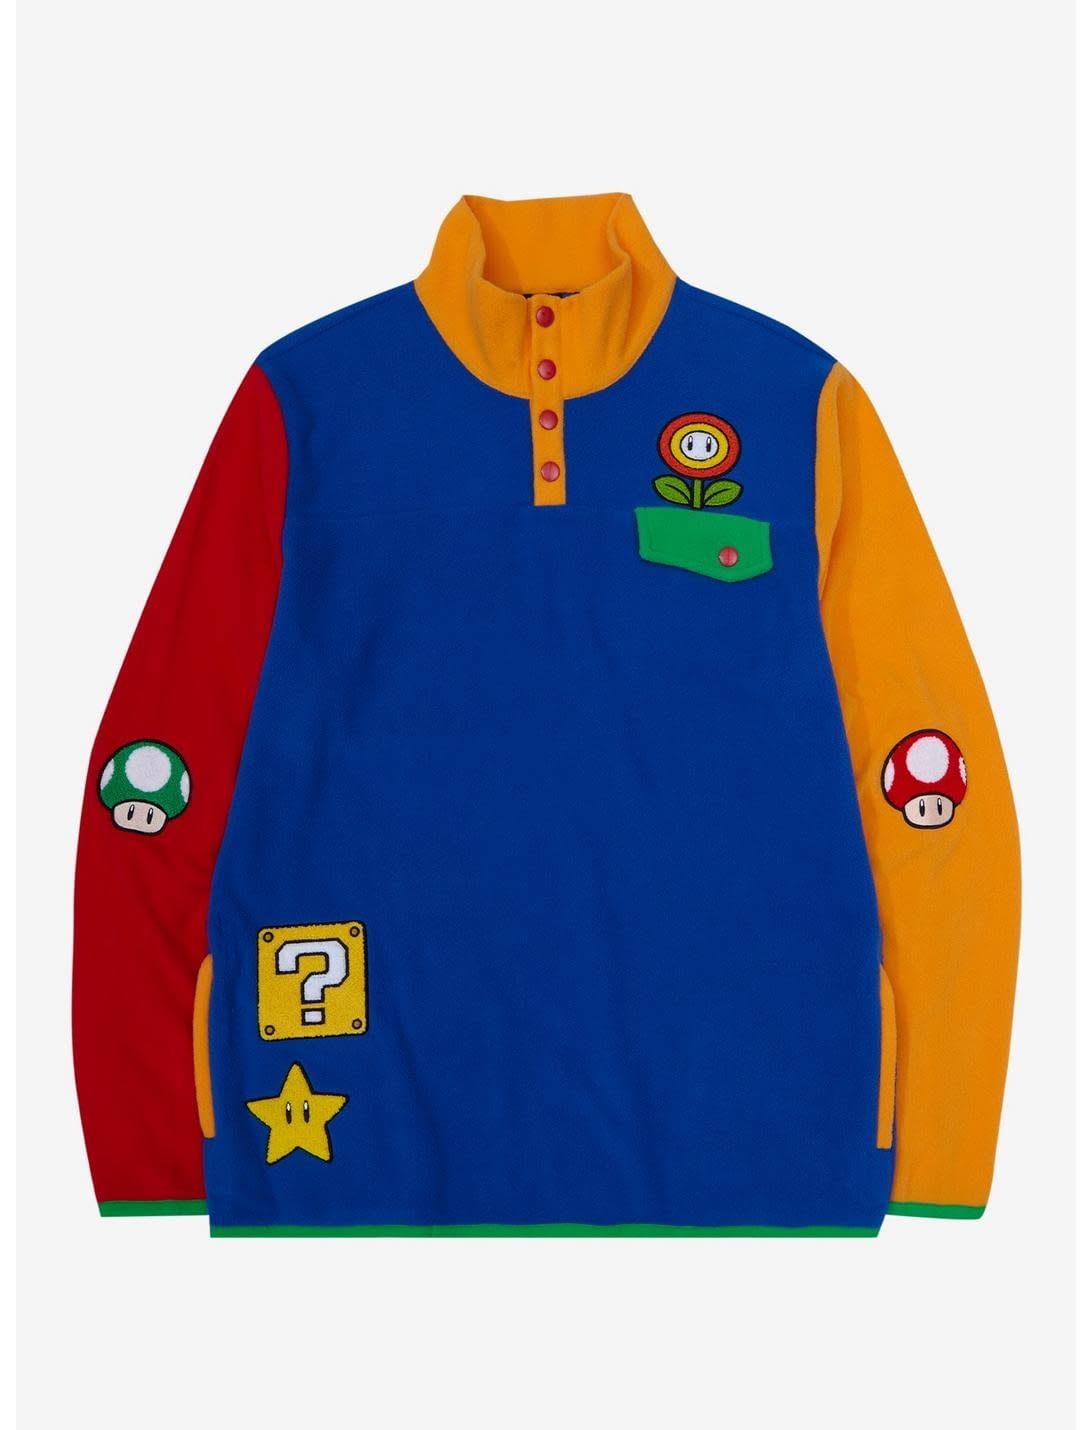 Let's a Go to BoxLunch for their New Super Mario Apparel Collection 